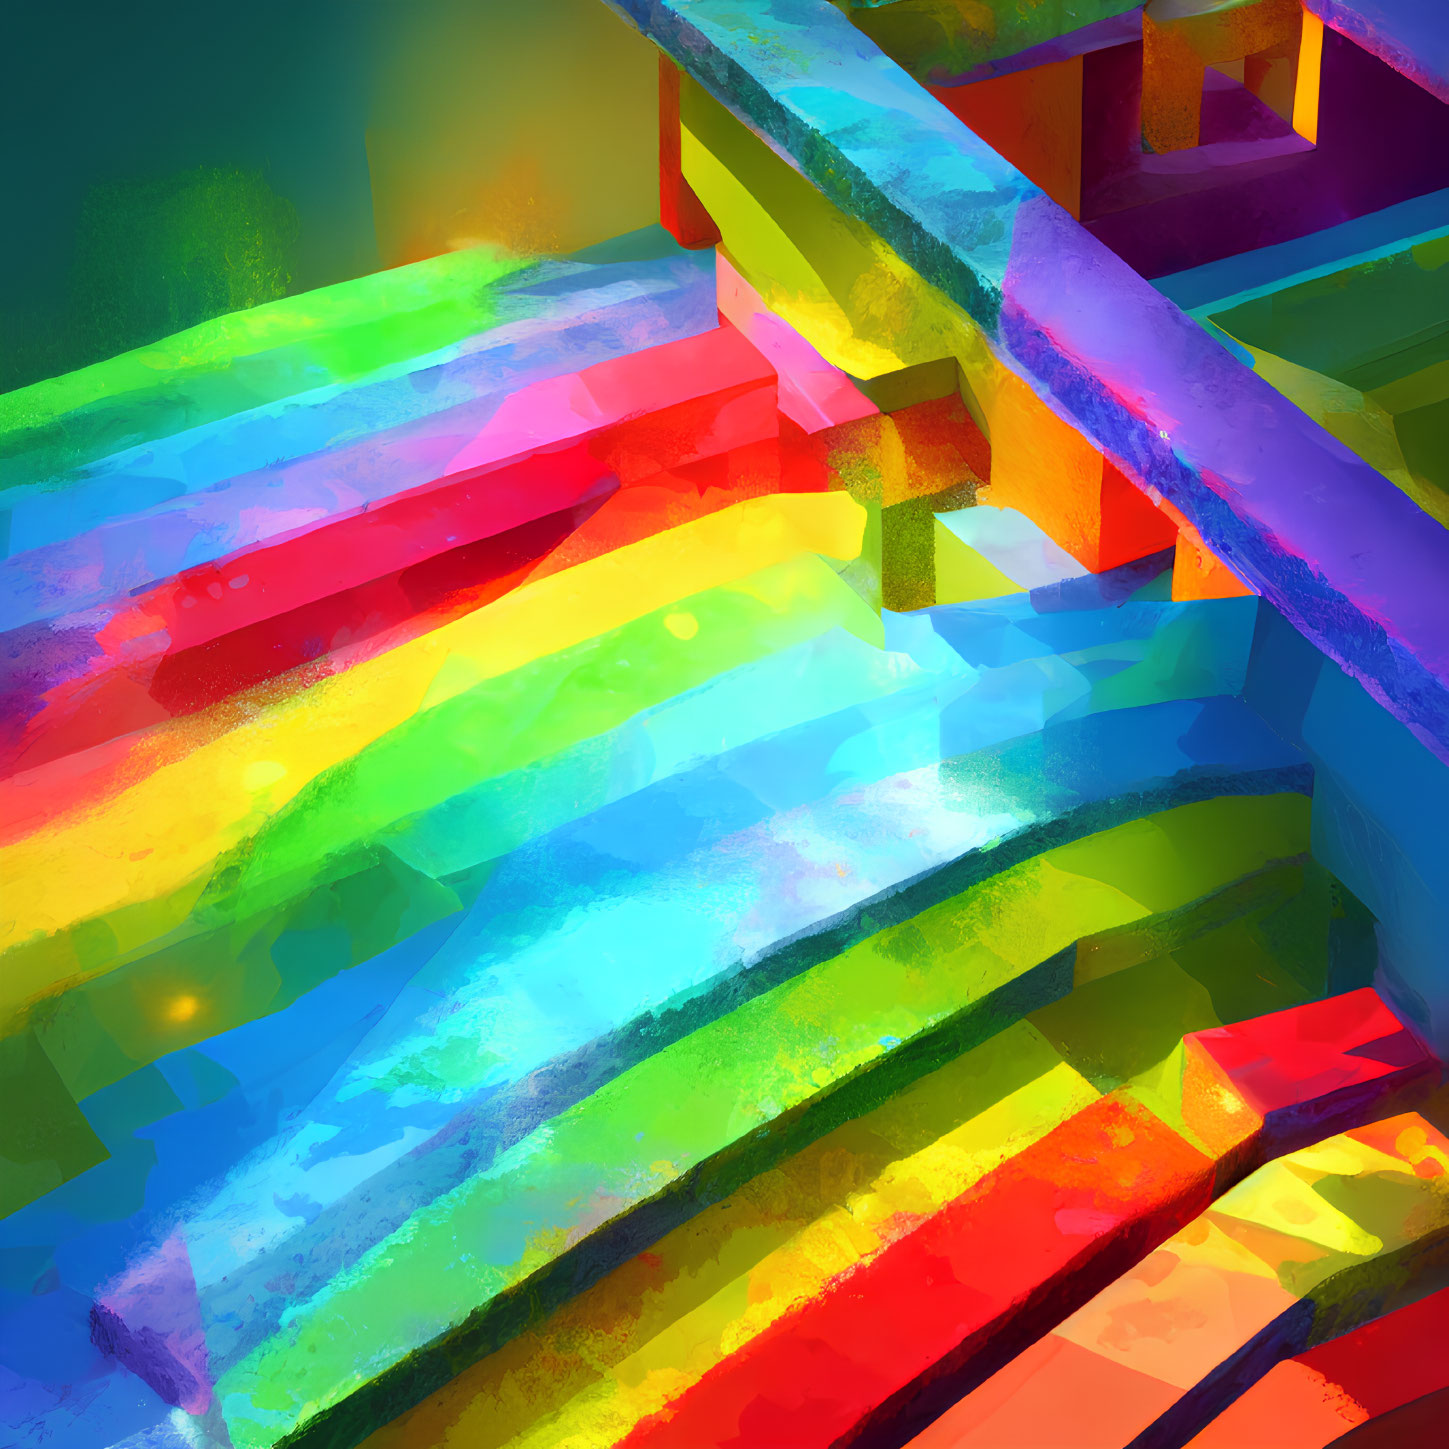 Colorful Abstract Digital Artwork: Multi-Hued Staircase with Light and Shadow Effects